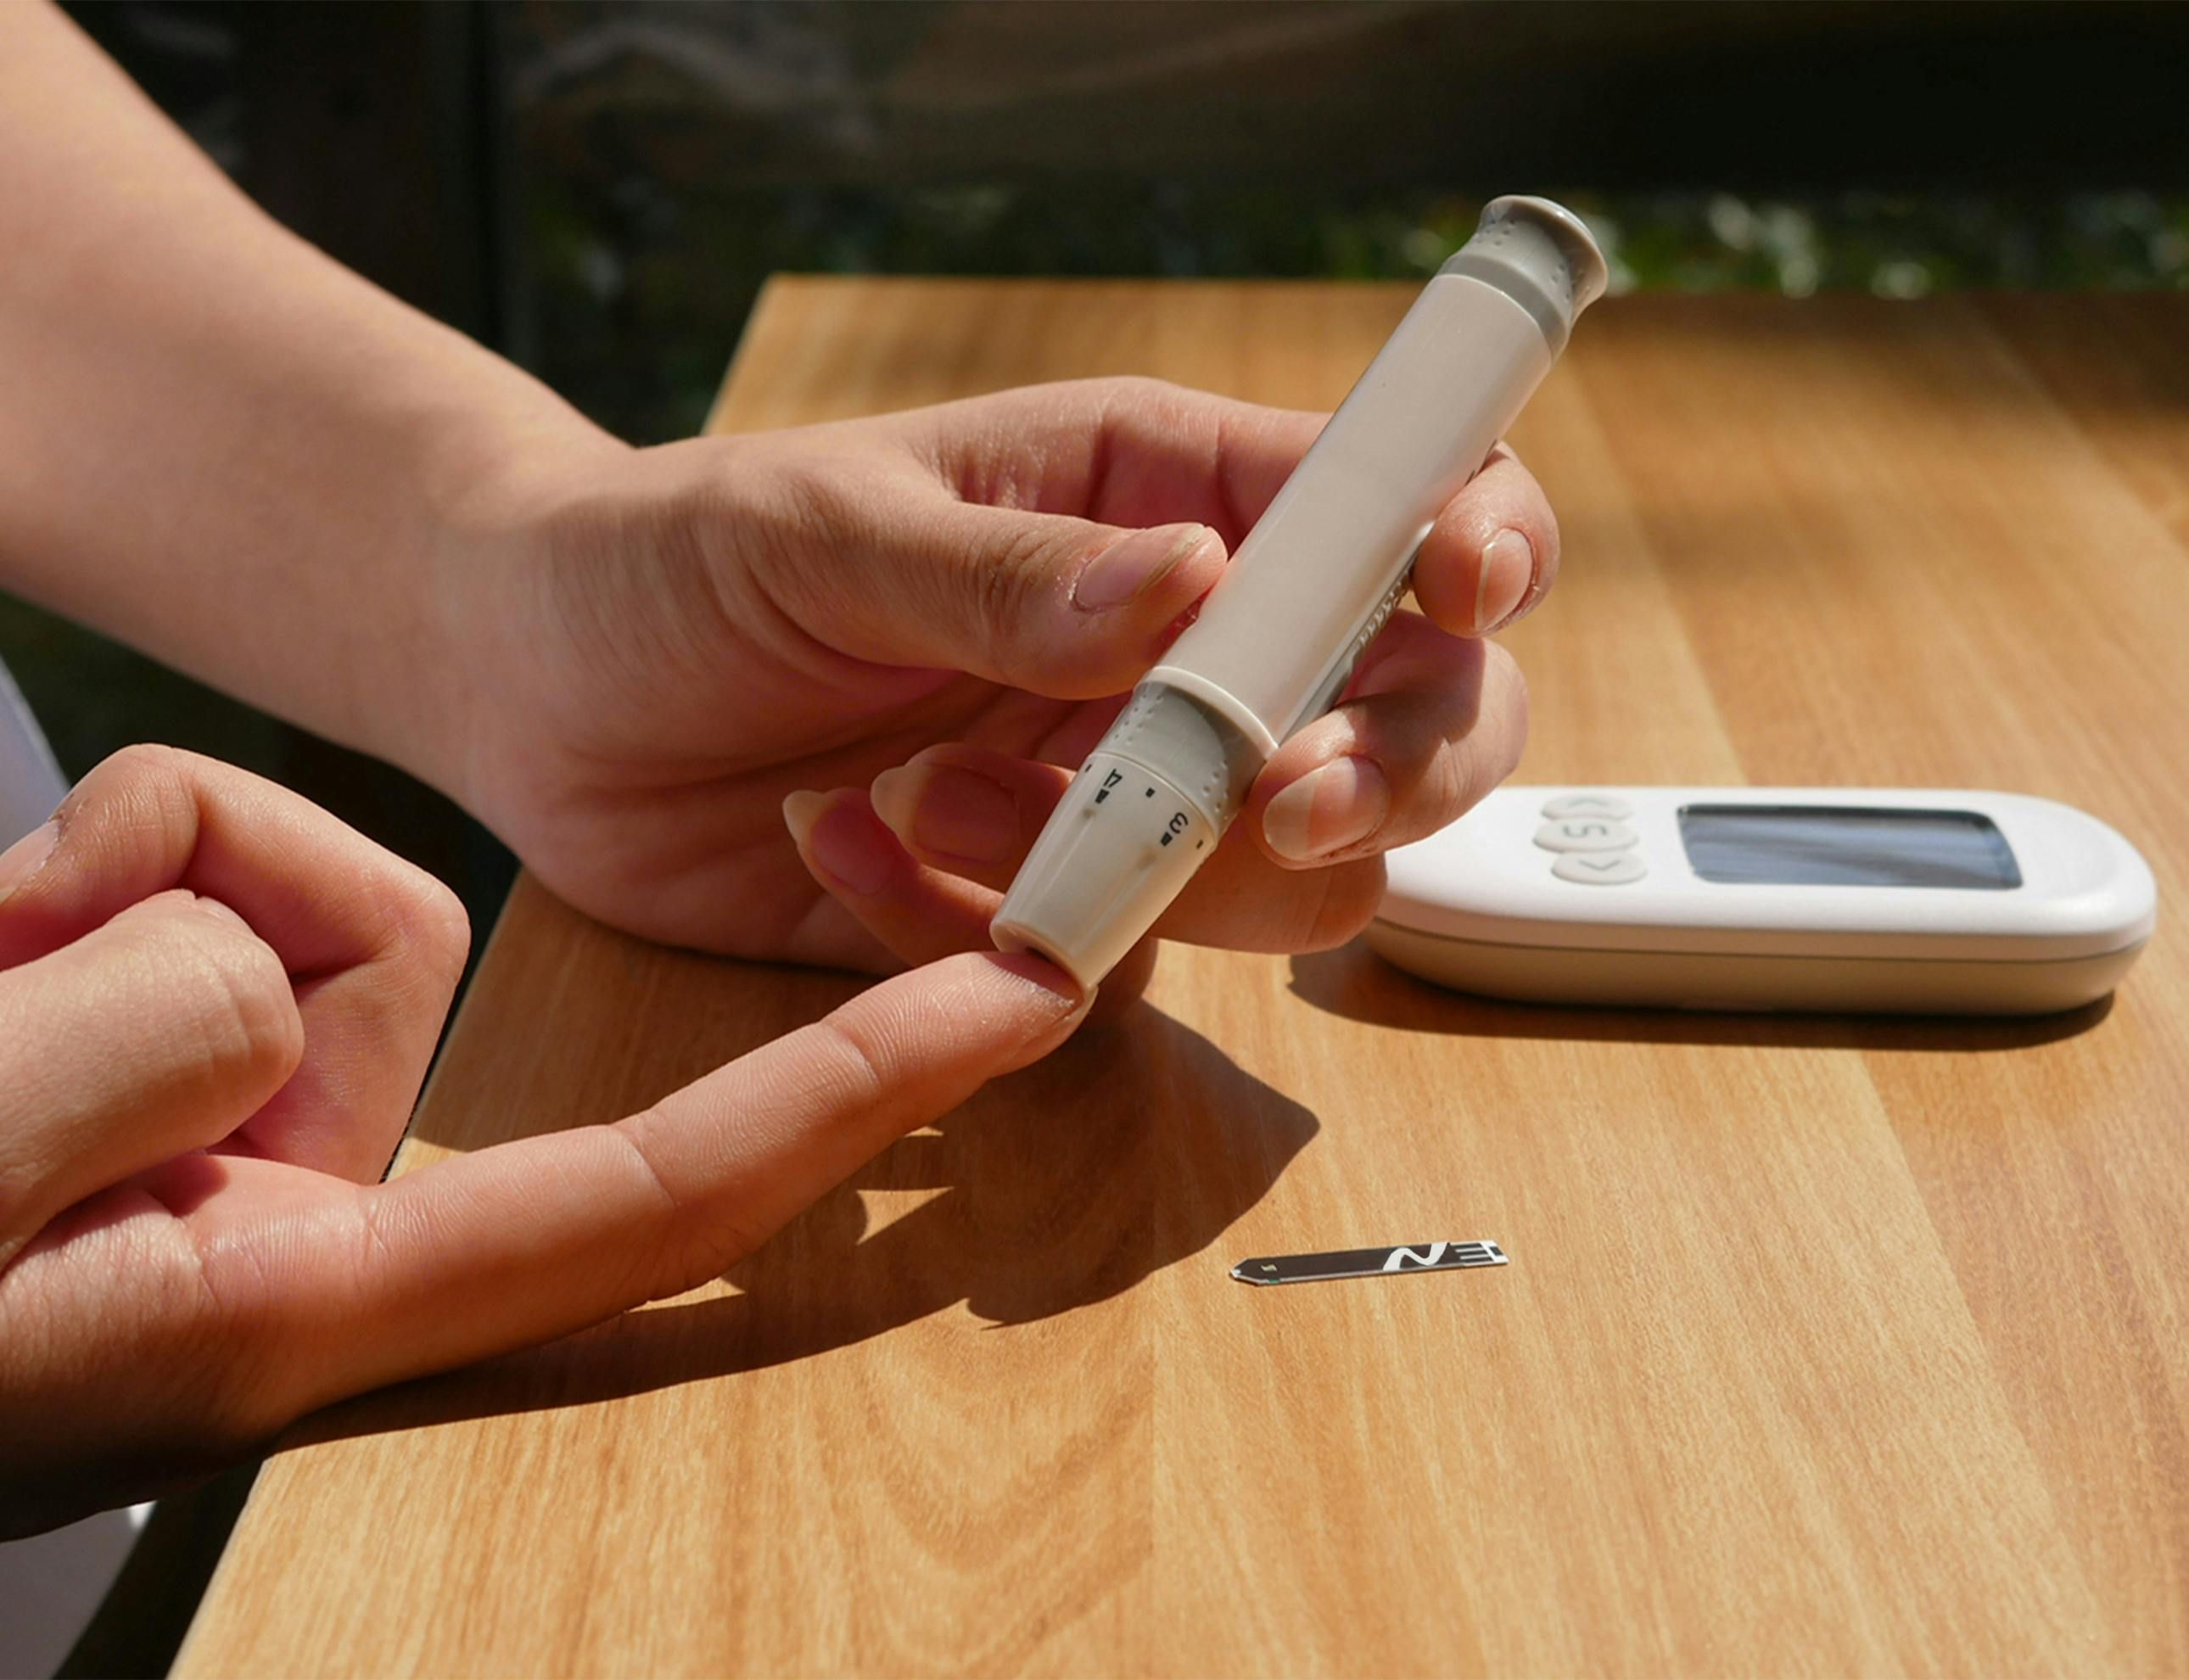 Woman checking blood sugar levels with glucometer during intermittent fasting